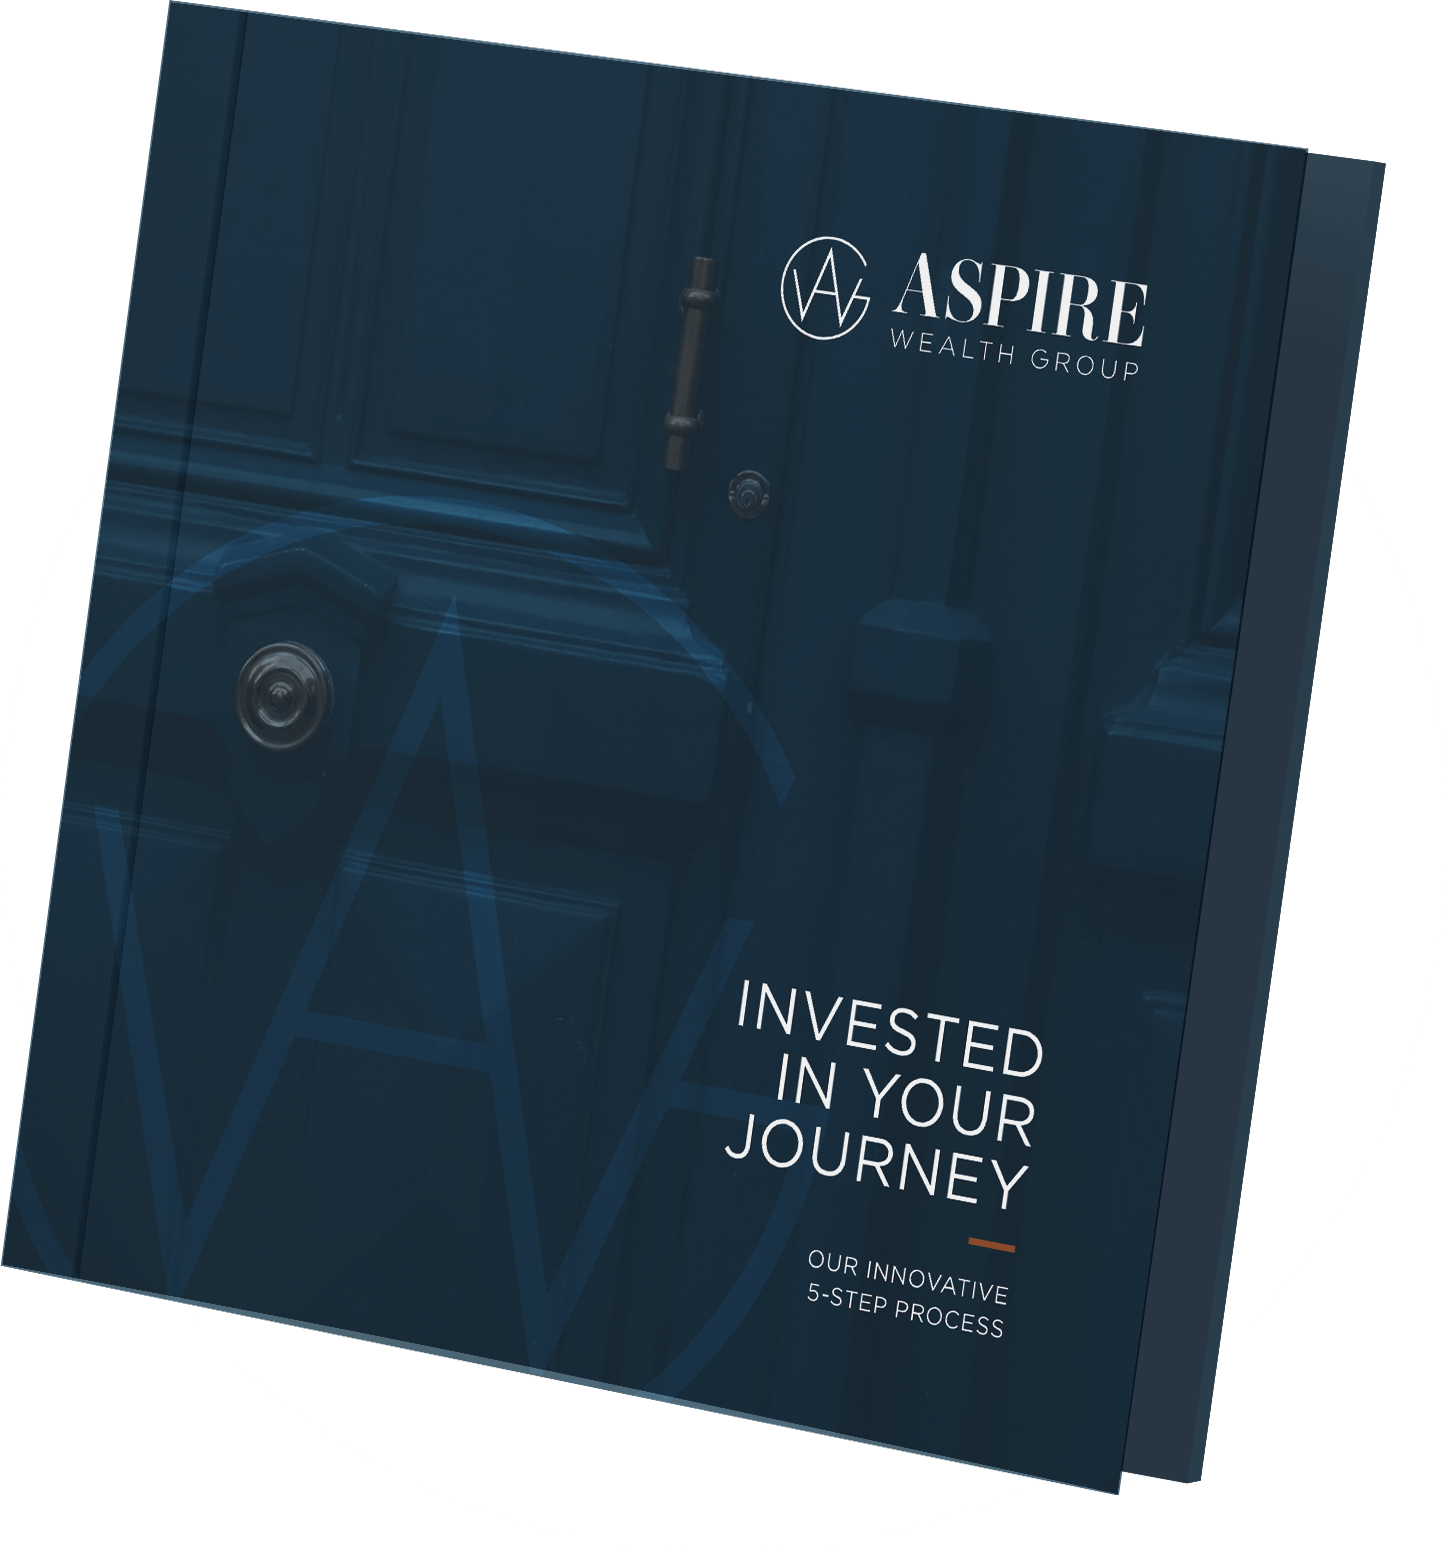 Invested In Your Journey • Aspire Wealth Group 5-Step Process Booklet Mockup